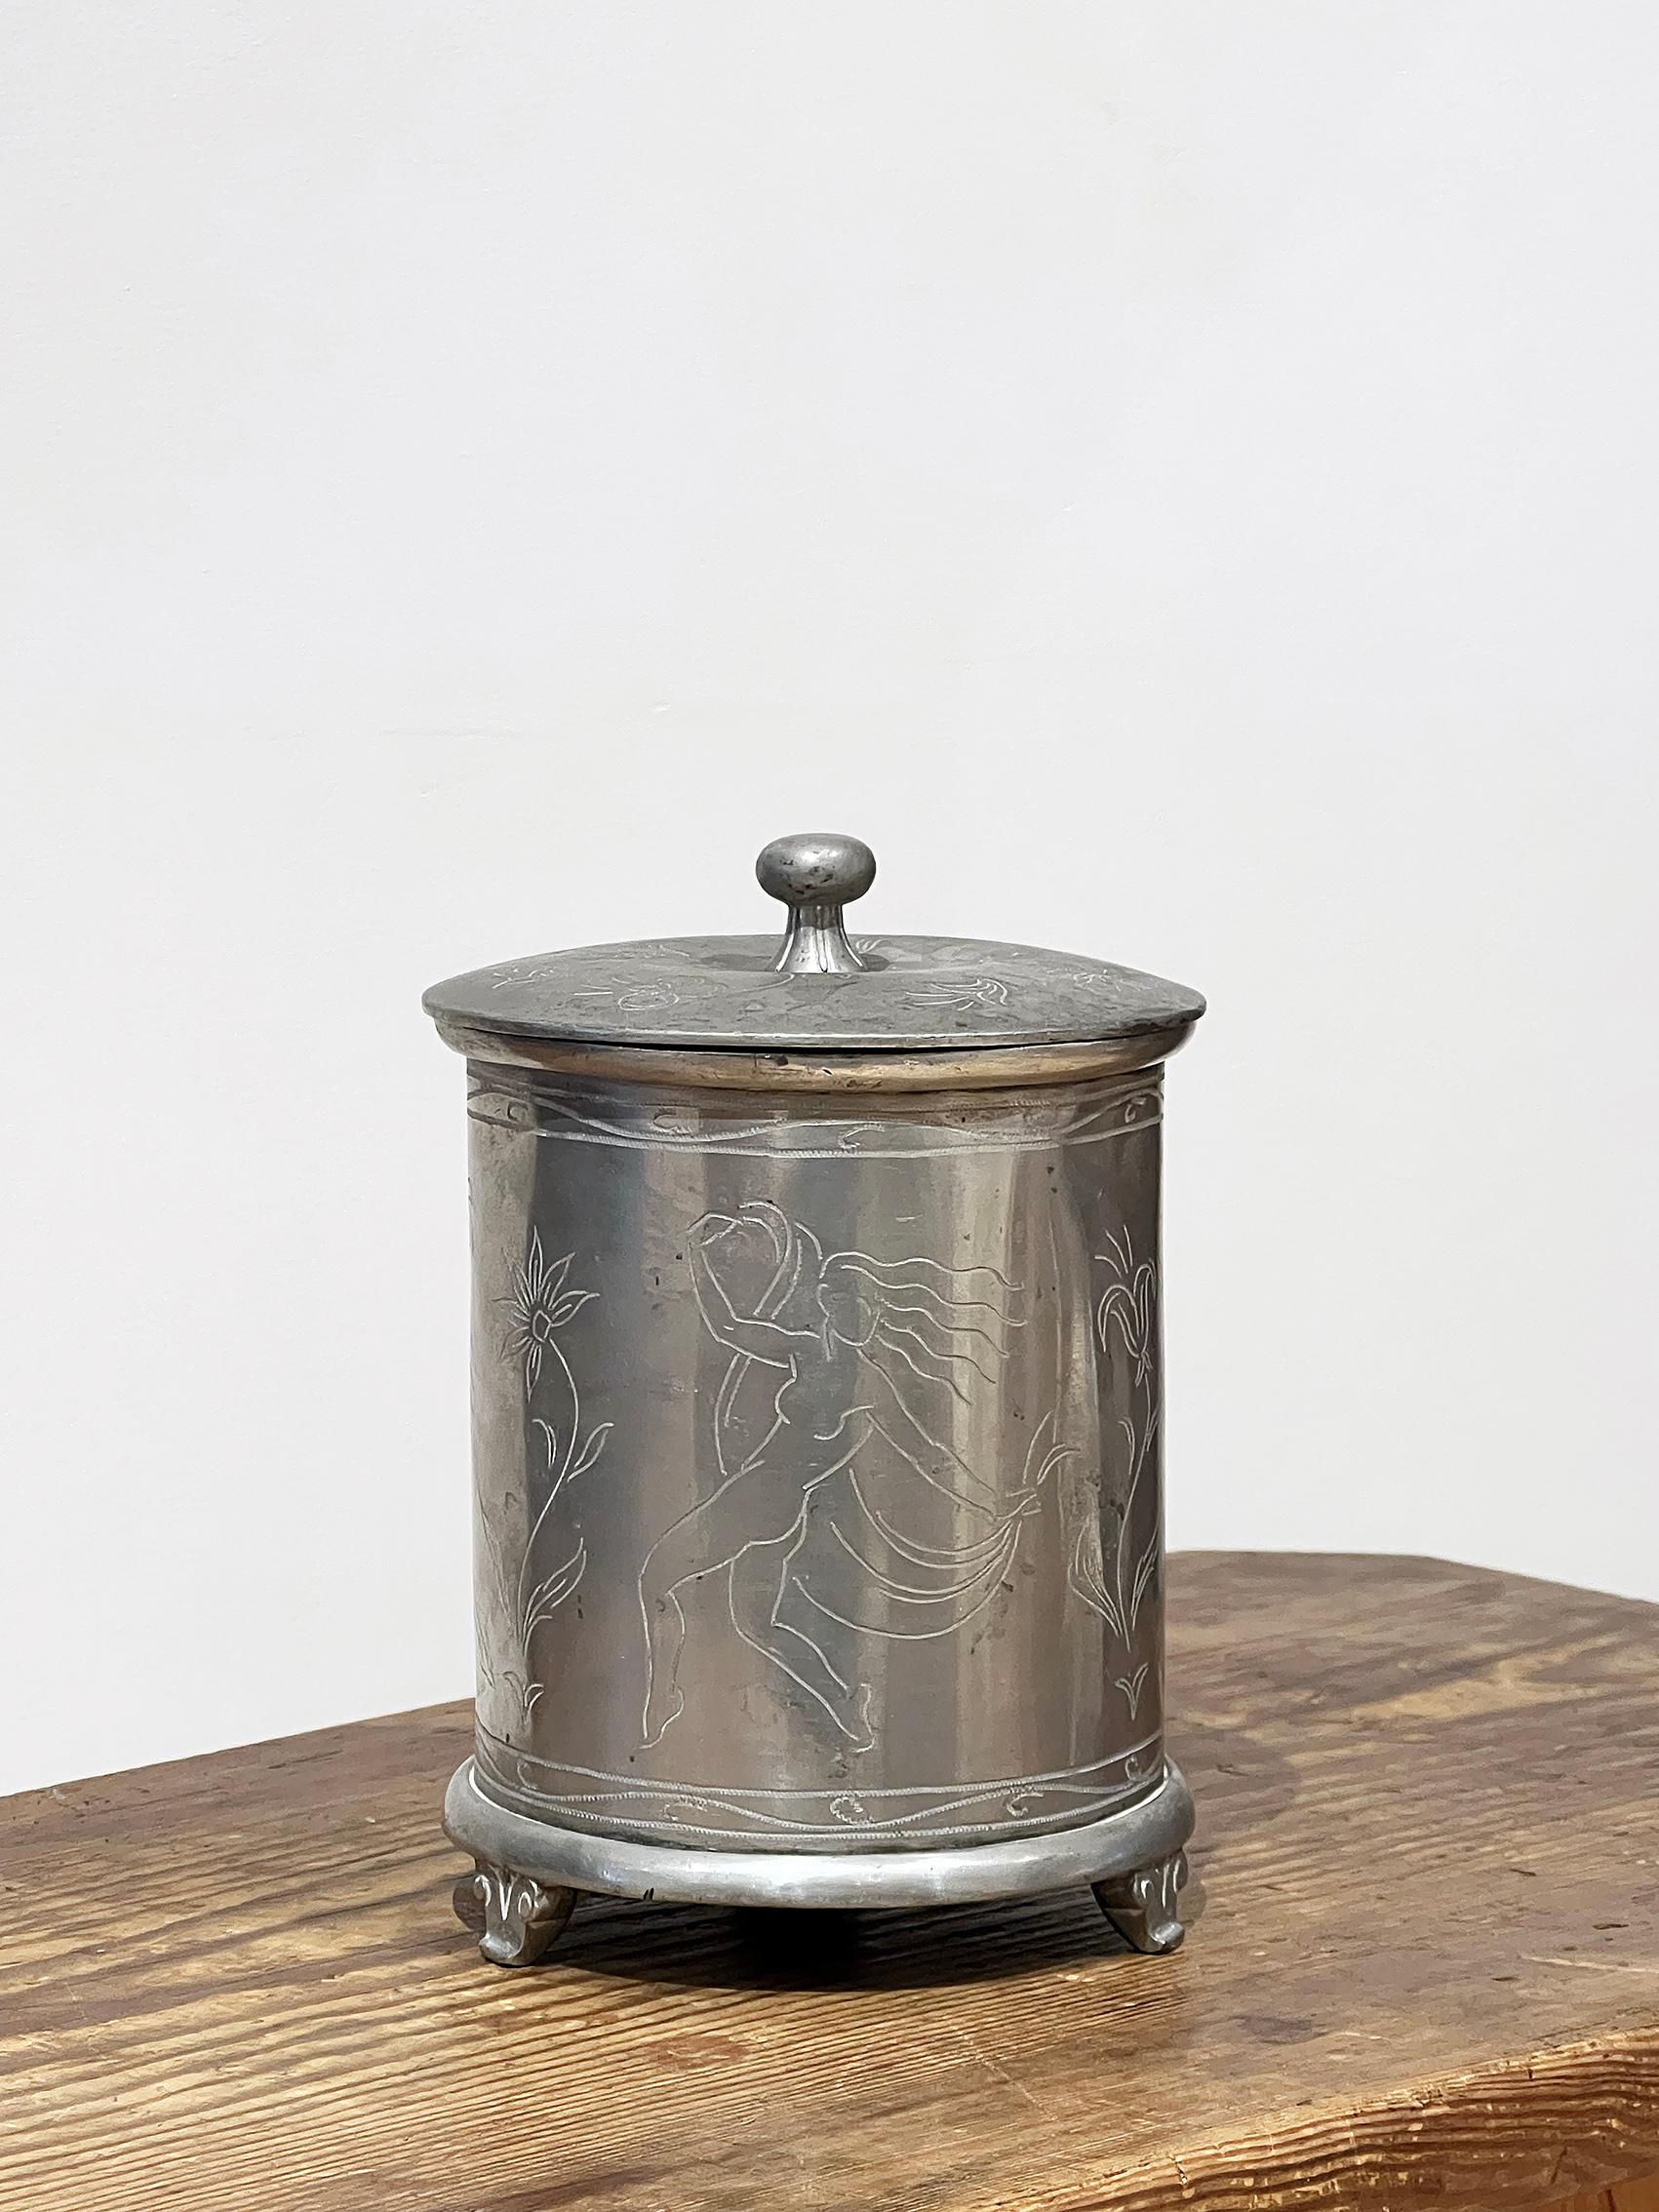 Absolutely stunning Scandinavian modern jar in pewter with beautiful etched decor, Sweden -1925.
Signed, Svanson 1925.
Wear and patina consistent with age and use.
Scratches, dents and blemishes. 